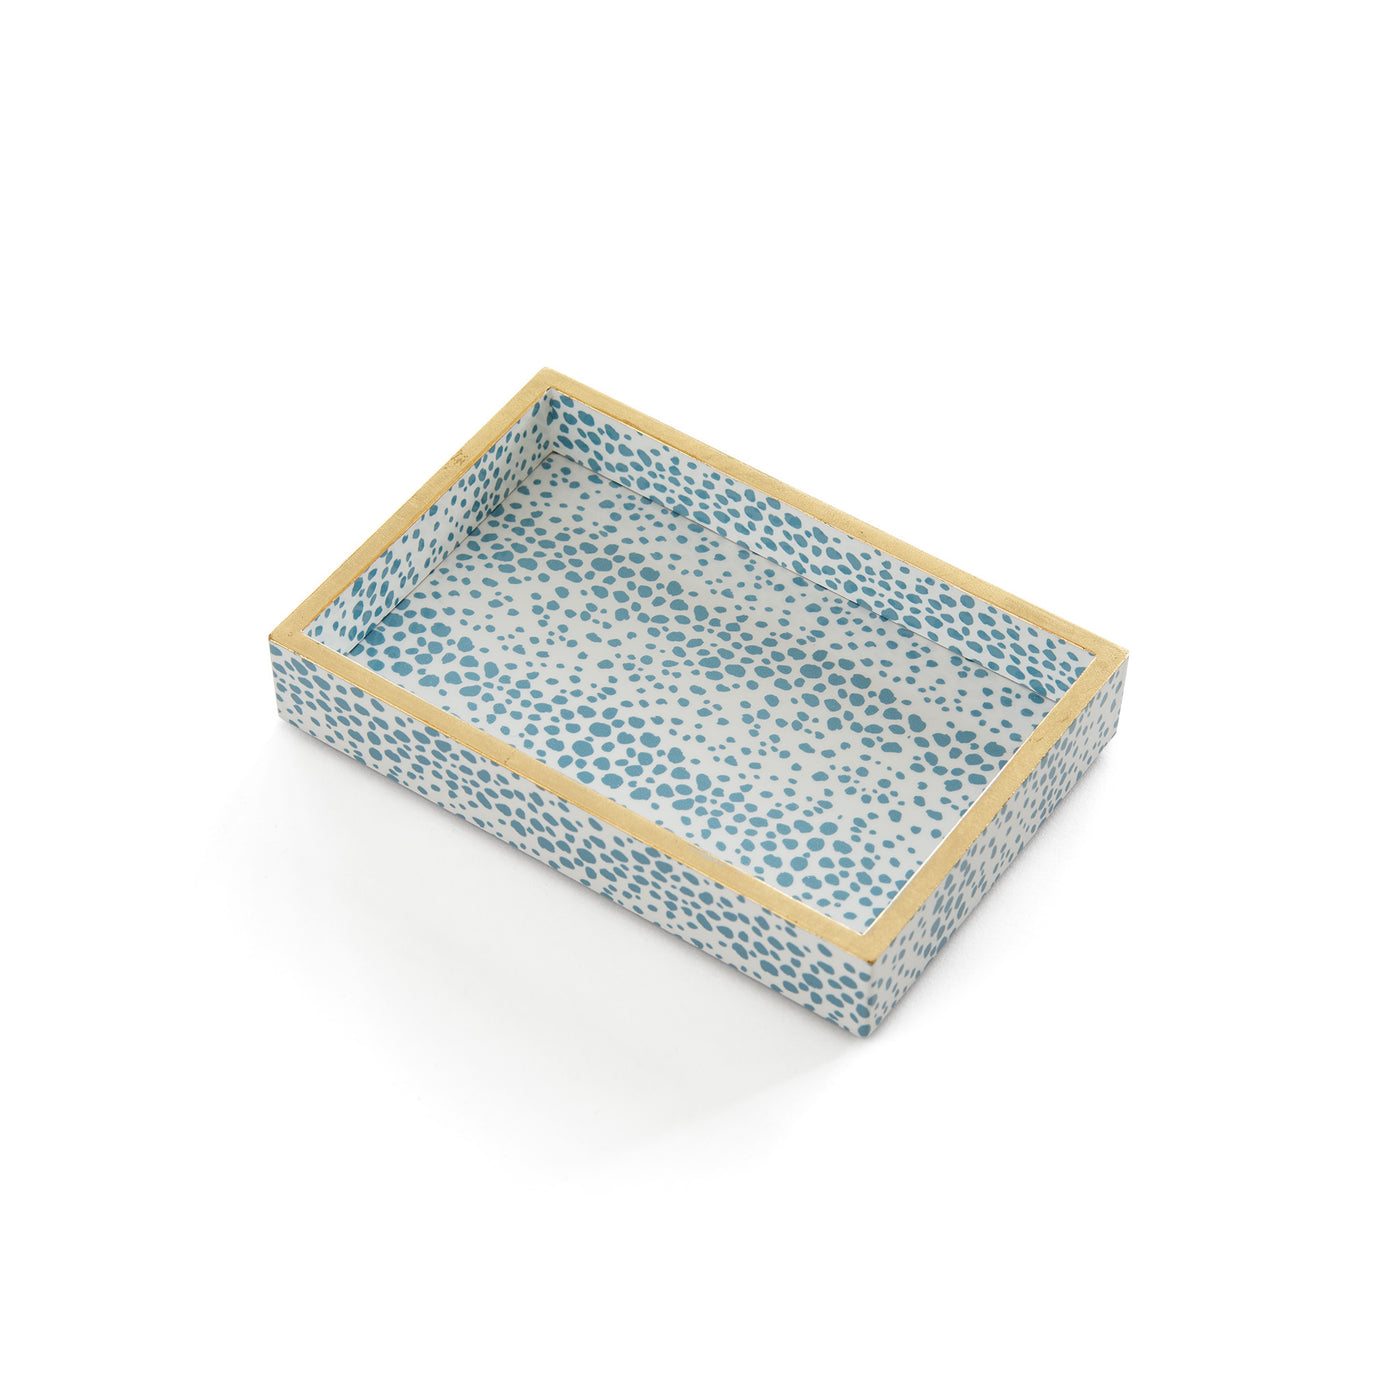 Lacquer Trinket Tray in Mist